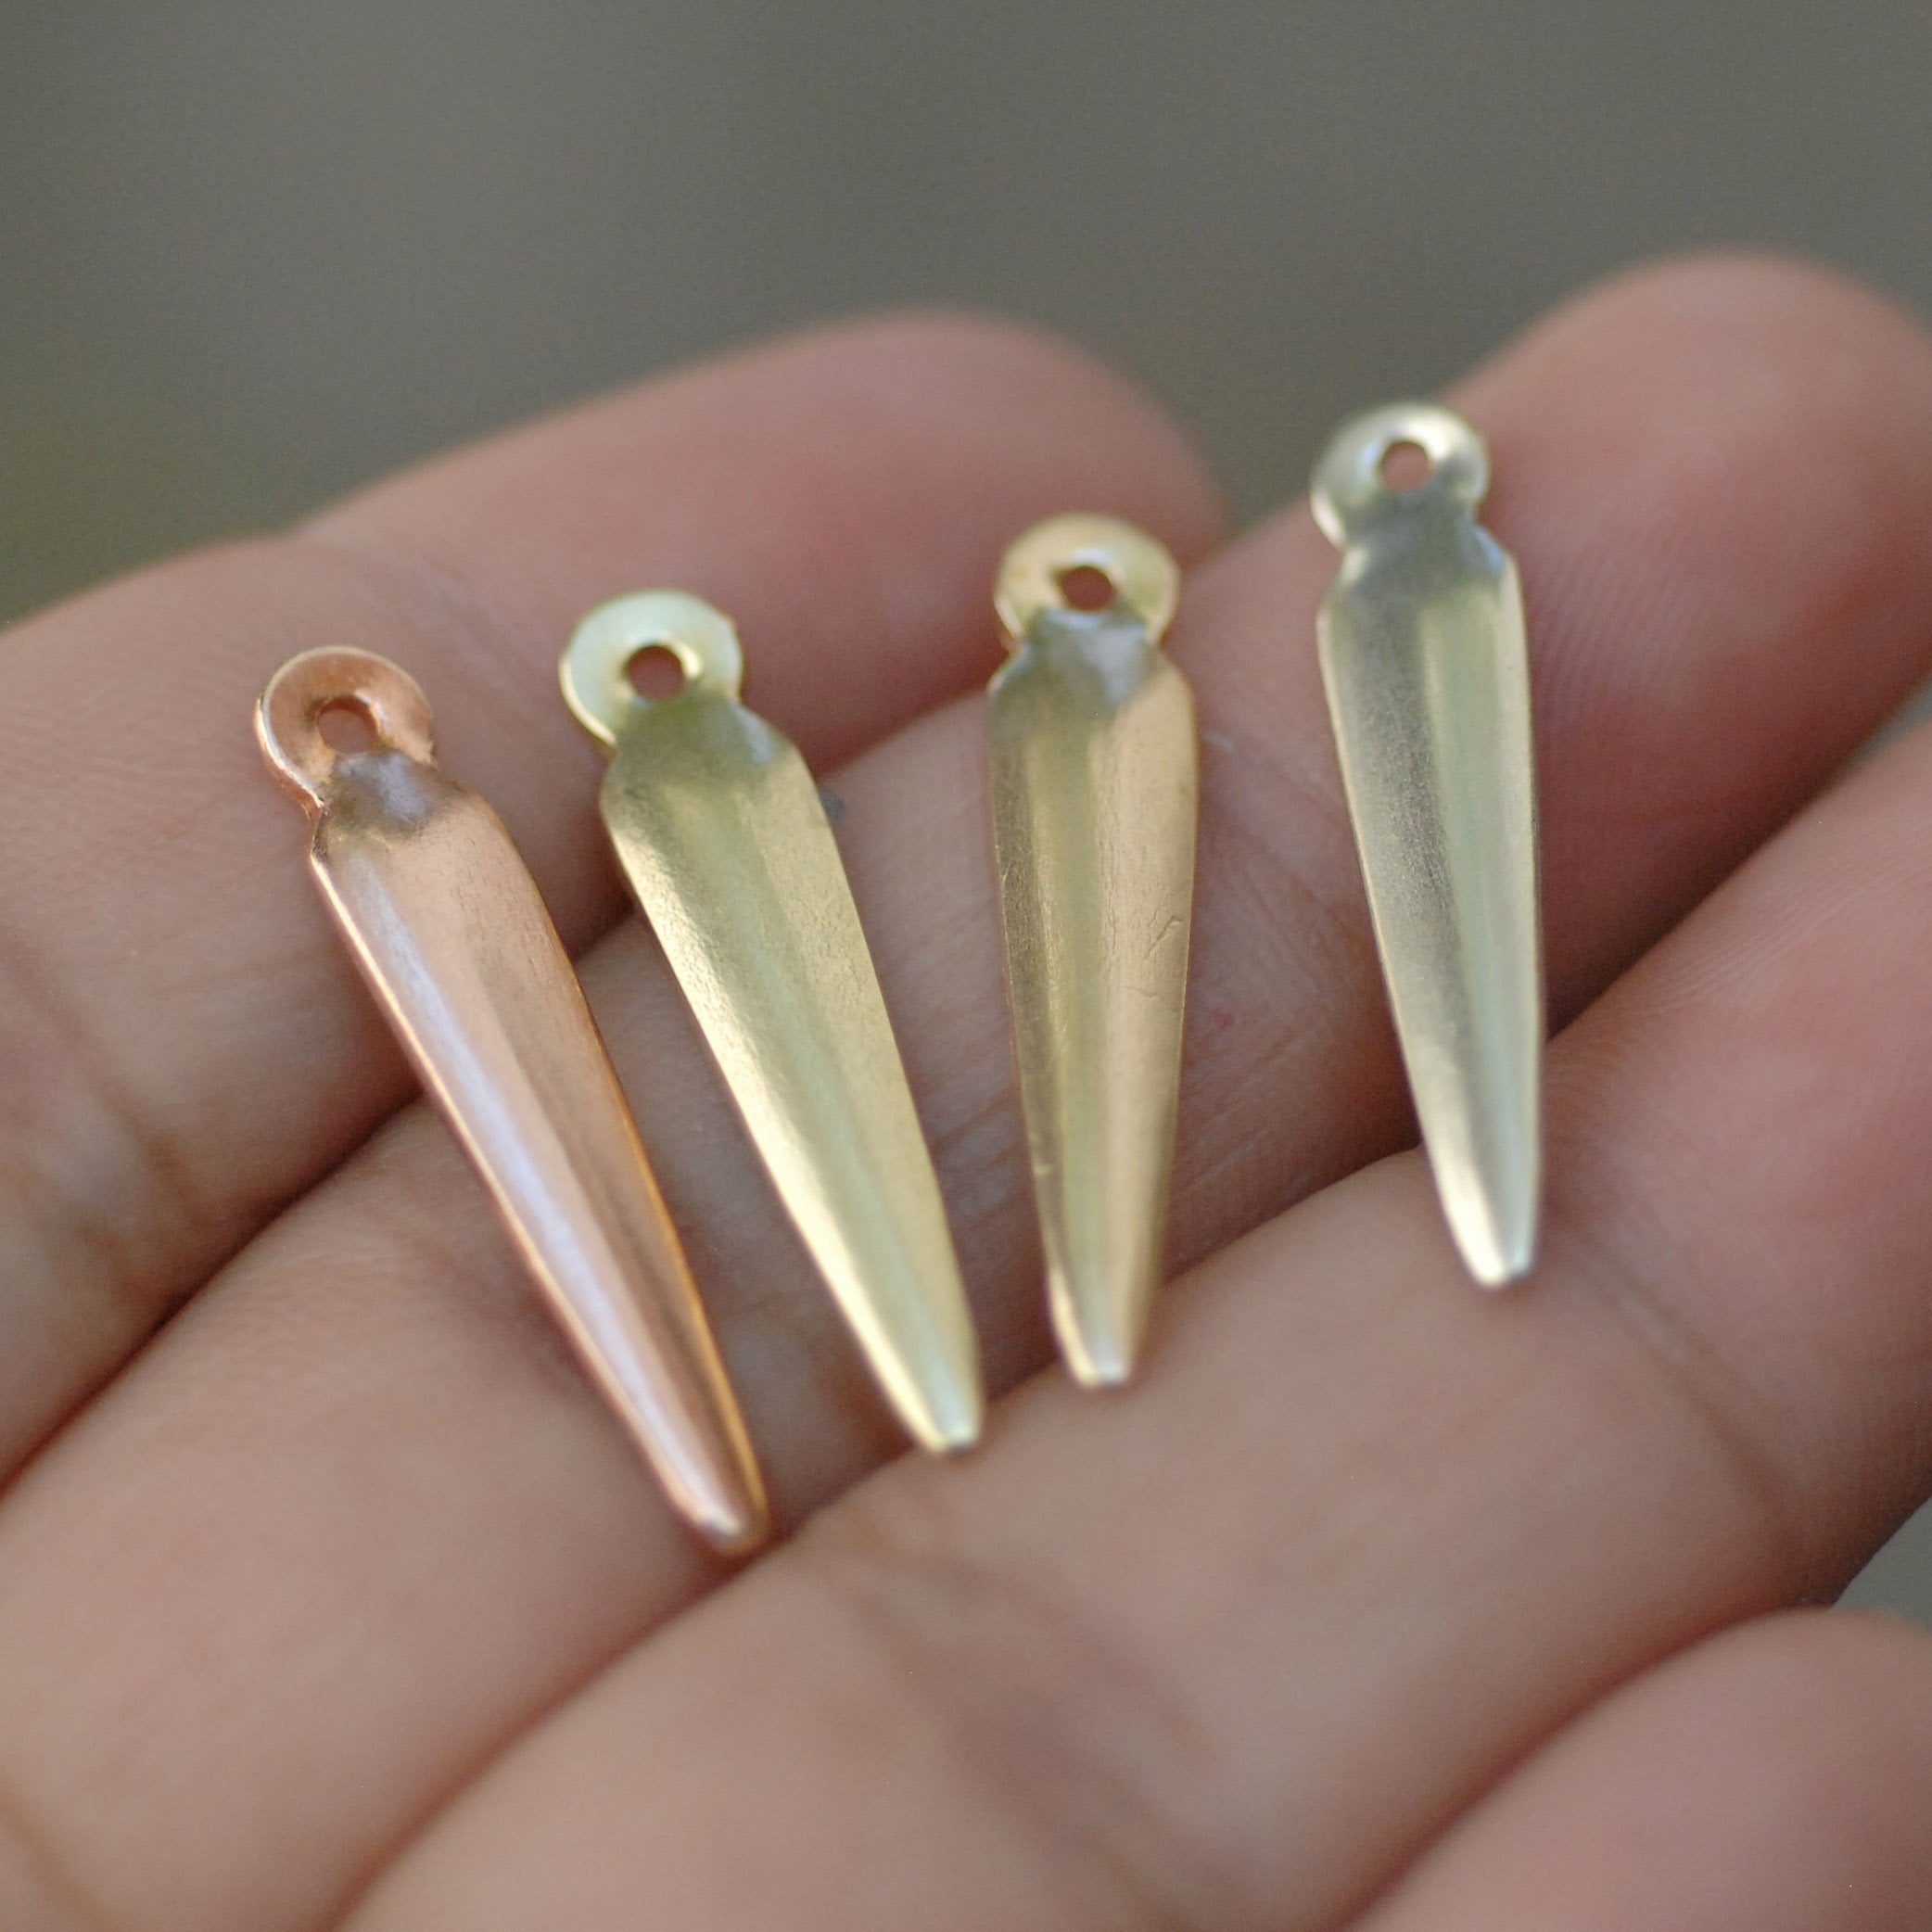 Long teardrop charm with hole for making jewelry - copper, brass, bronze, nickel silver, 24g 22g 20g